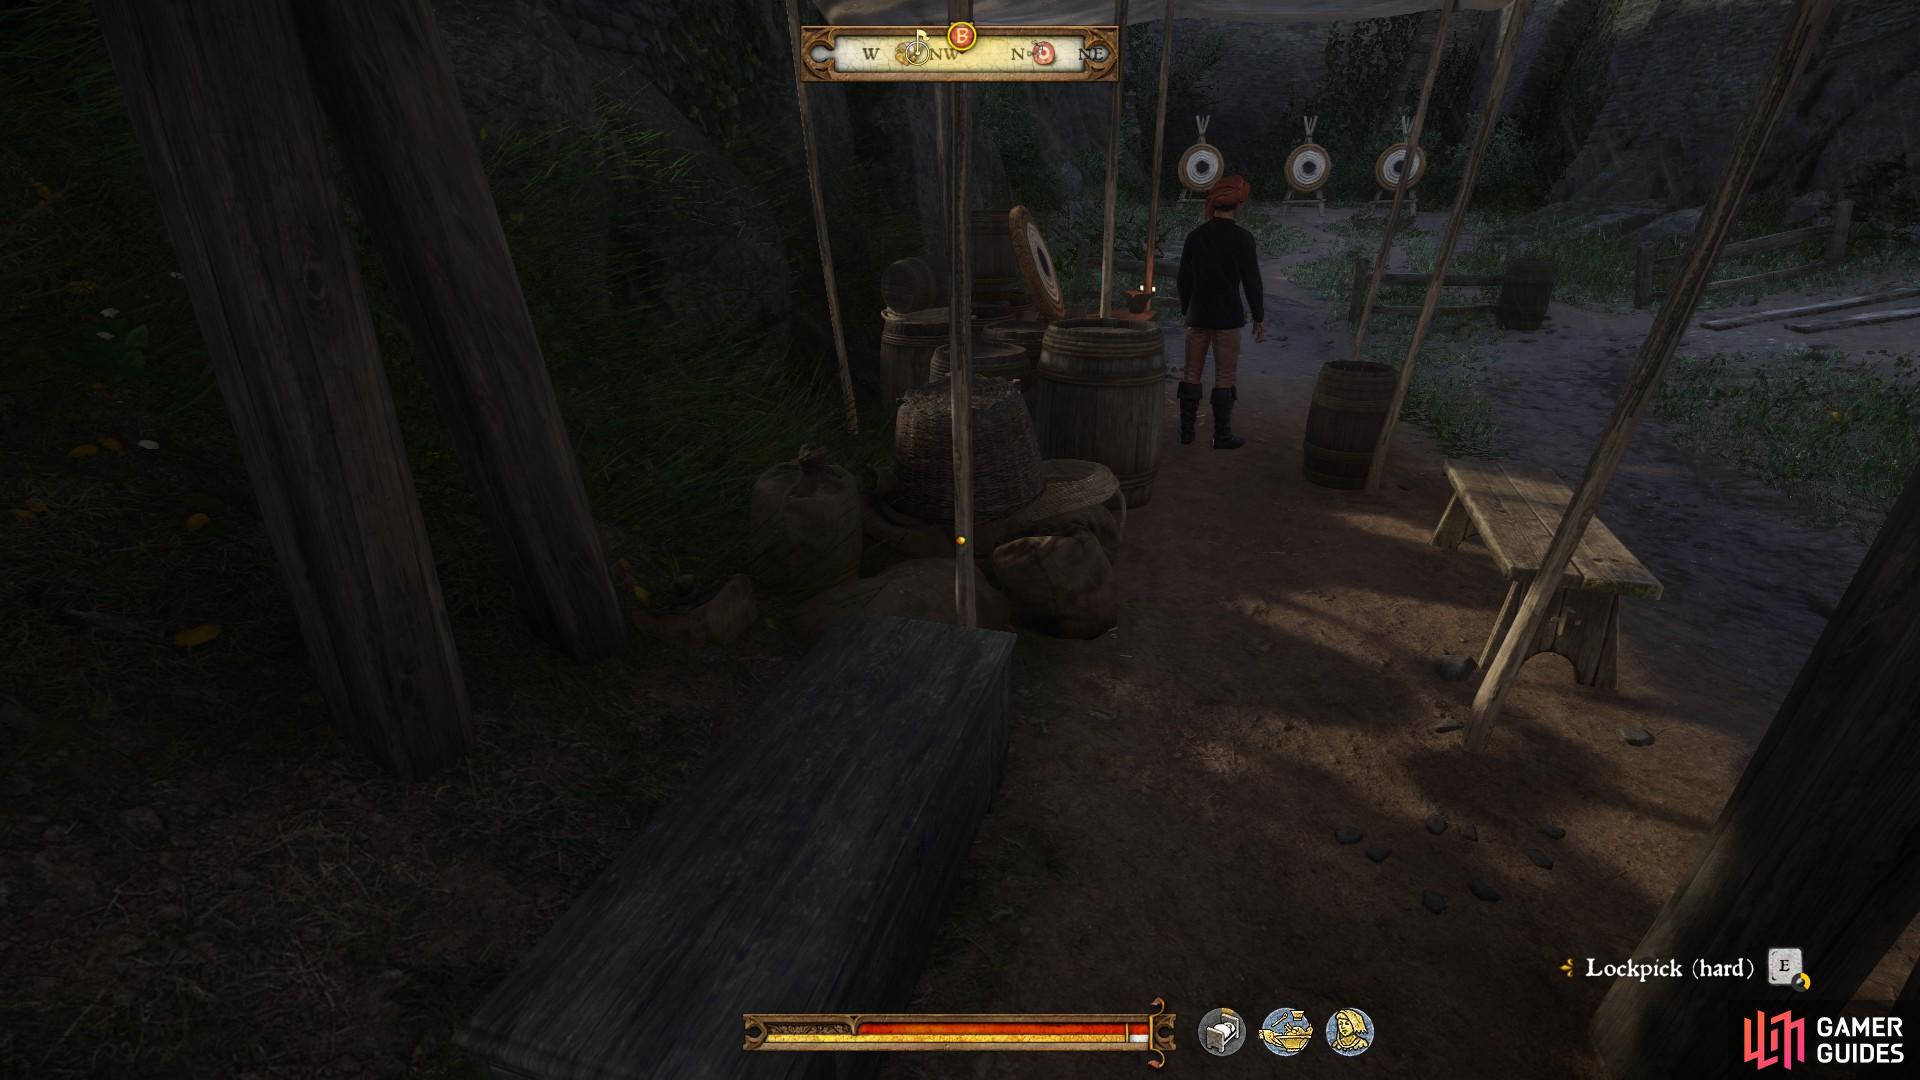 The chest with the wine in it is located directly behind the archery master. Be sure to loot it before the archery contest begins if you want to steal the wine.